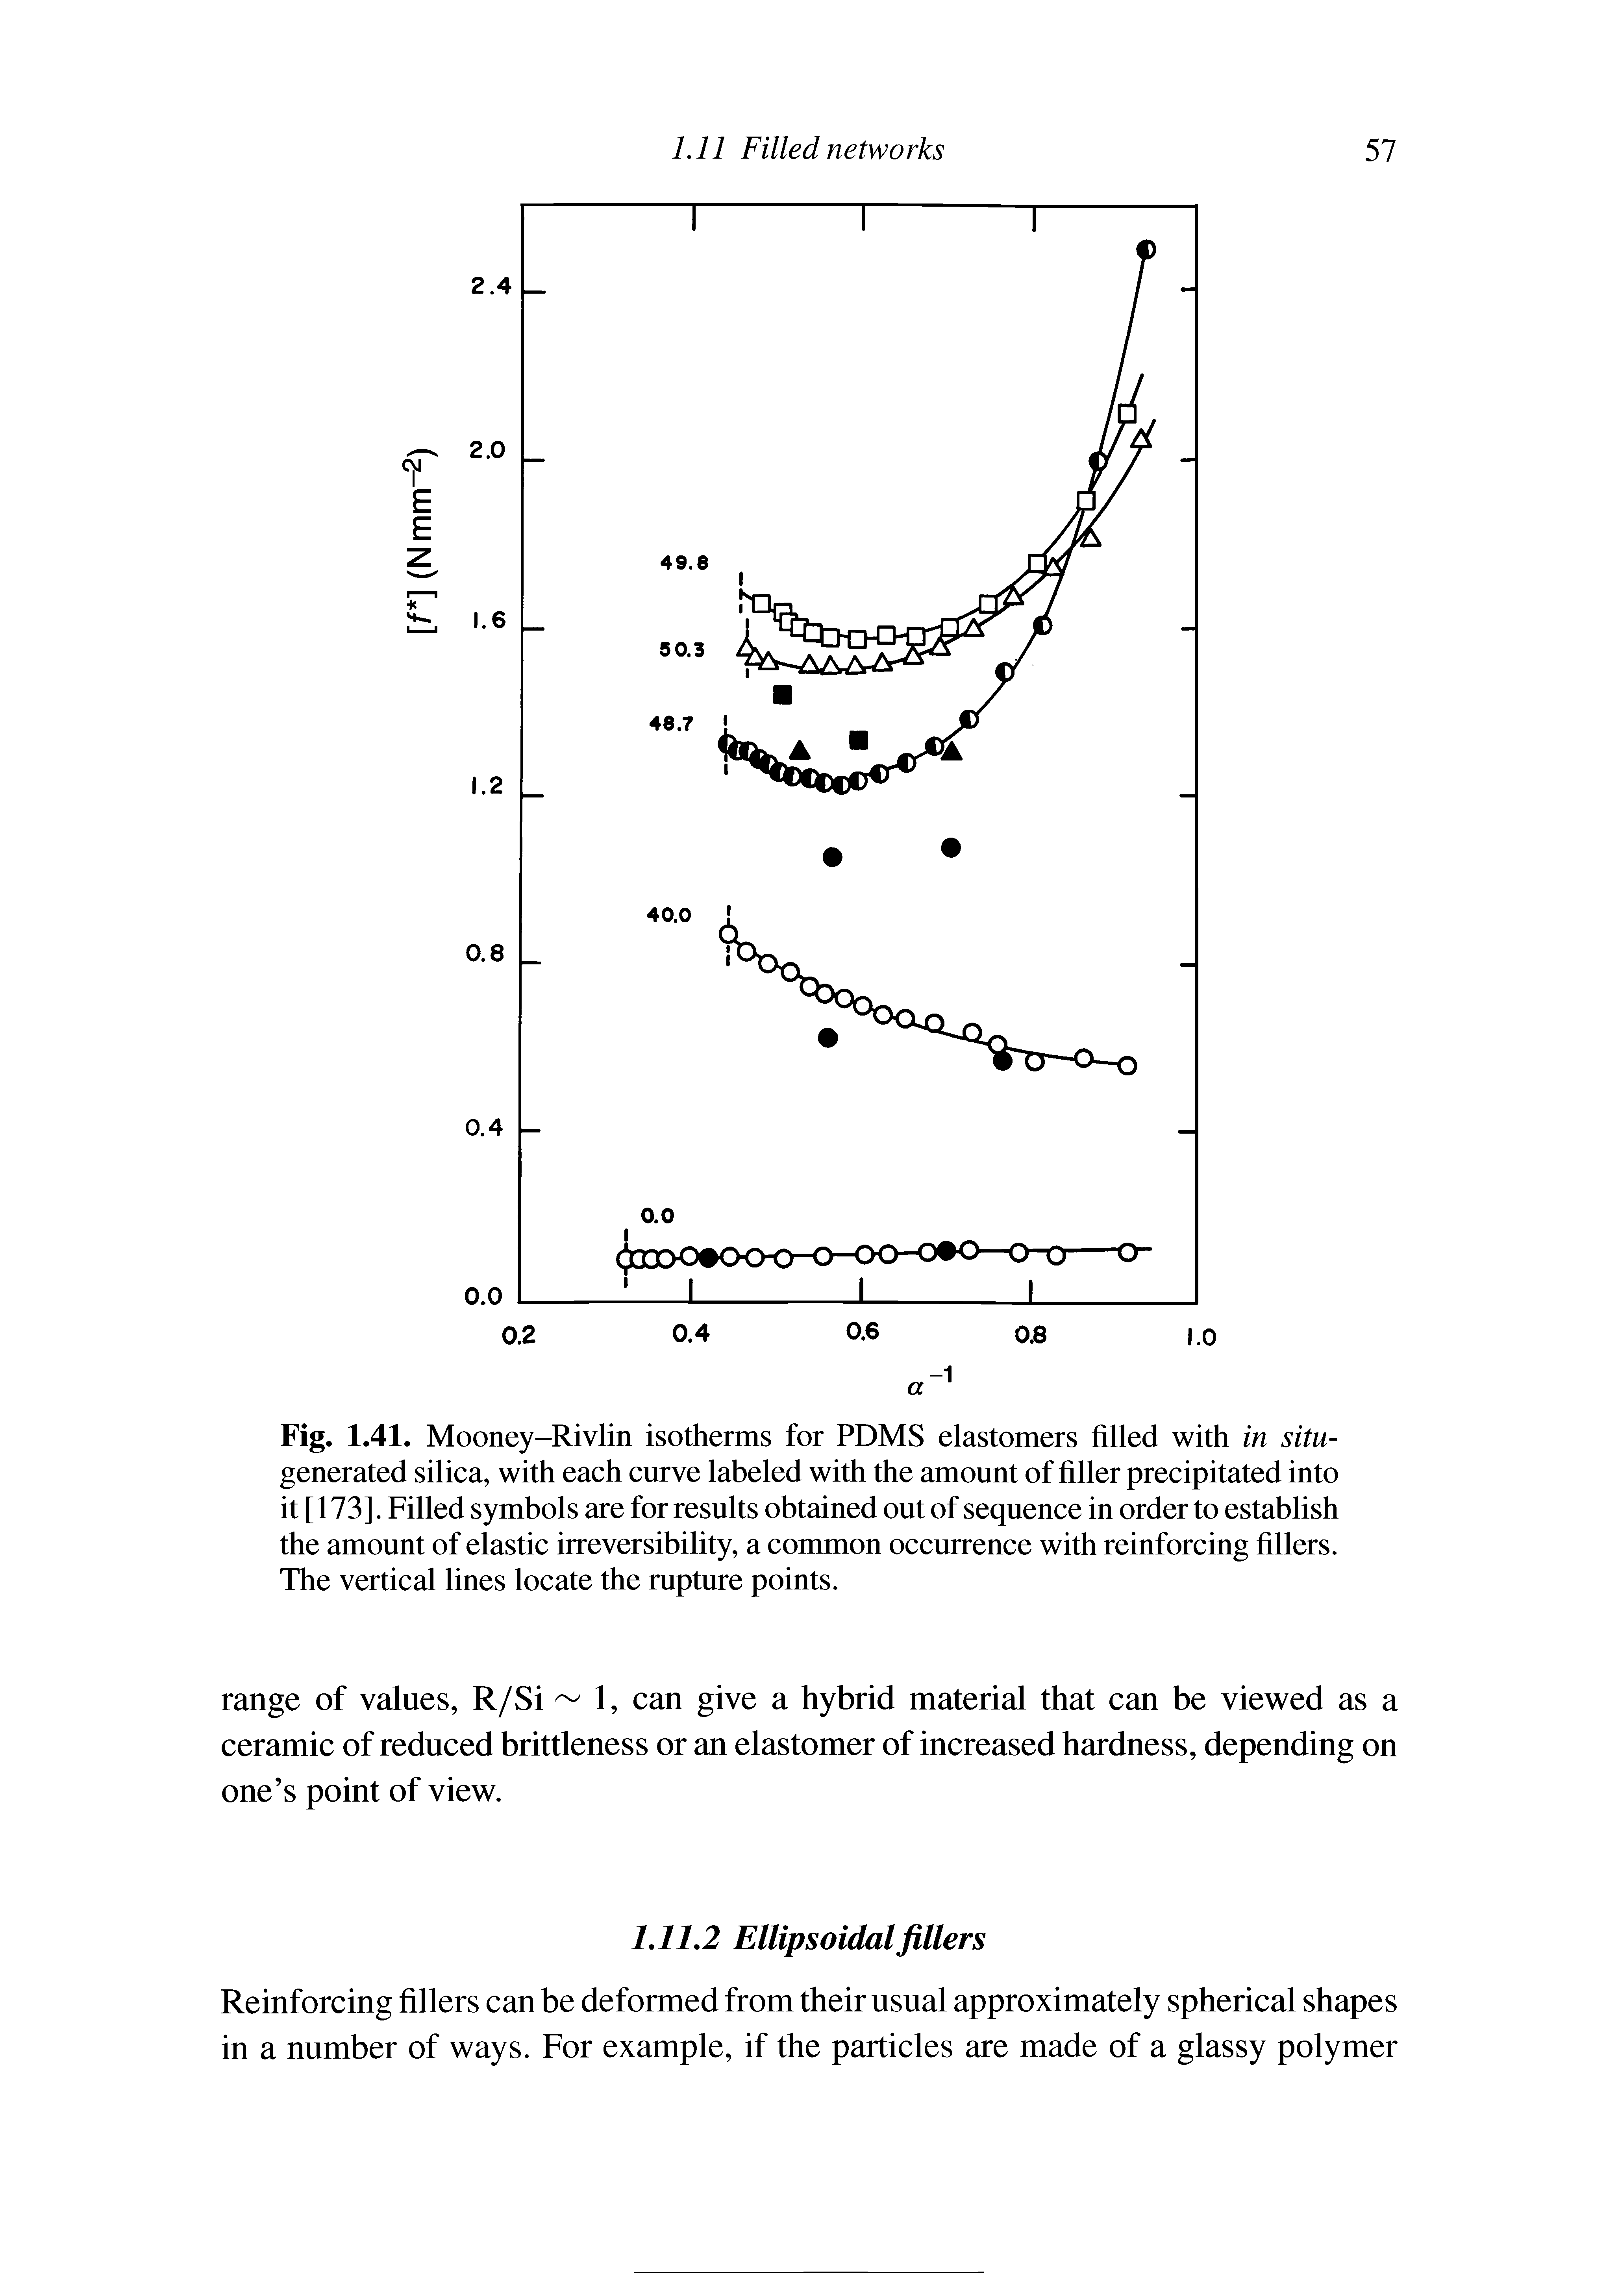 Fig. 1.41. Mooney-Rivlin isotherms for PDMS elastomers filled with in situ-generated silica, with each curve labeled with the amount of filler precipitated into it [173]. Filled symbols are for results obtained out of sequence in order to establish the amount of elastic irreversibility, a common occurrence with reinforcing fillers. The vertical lines locate the rupture points.